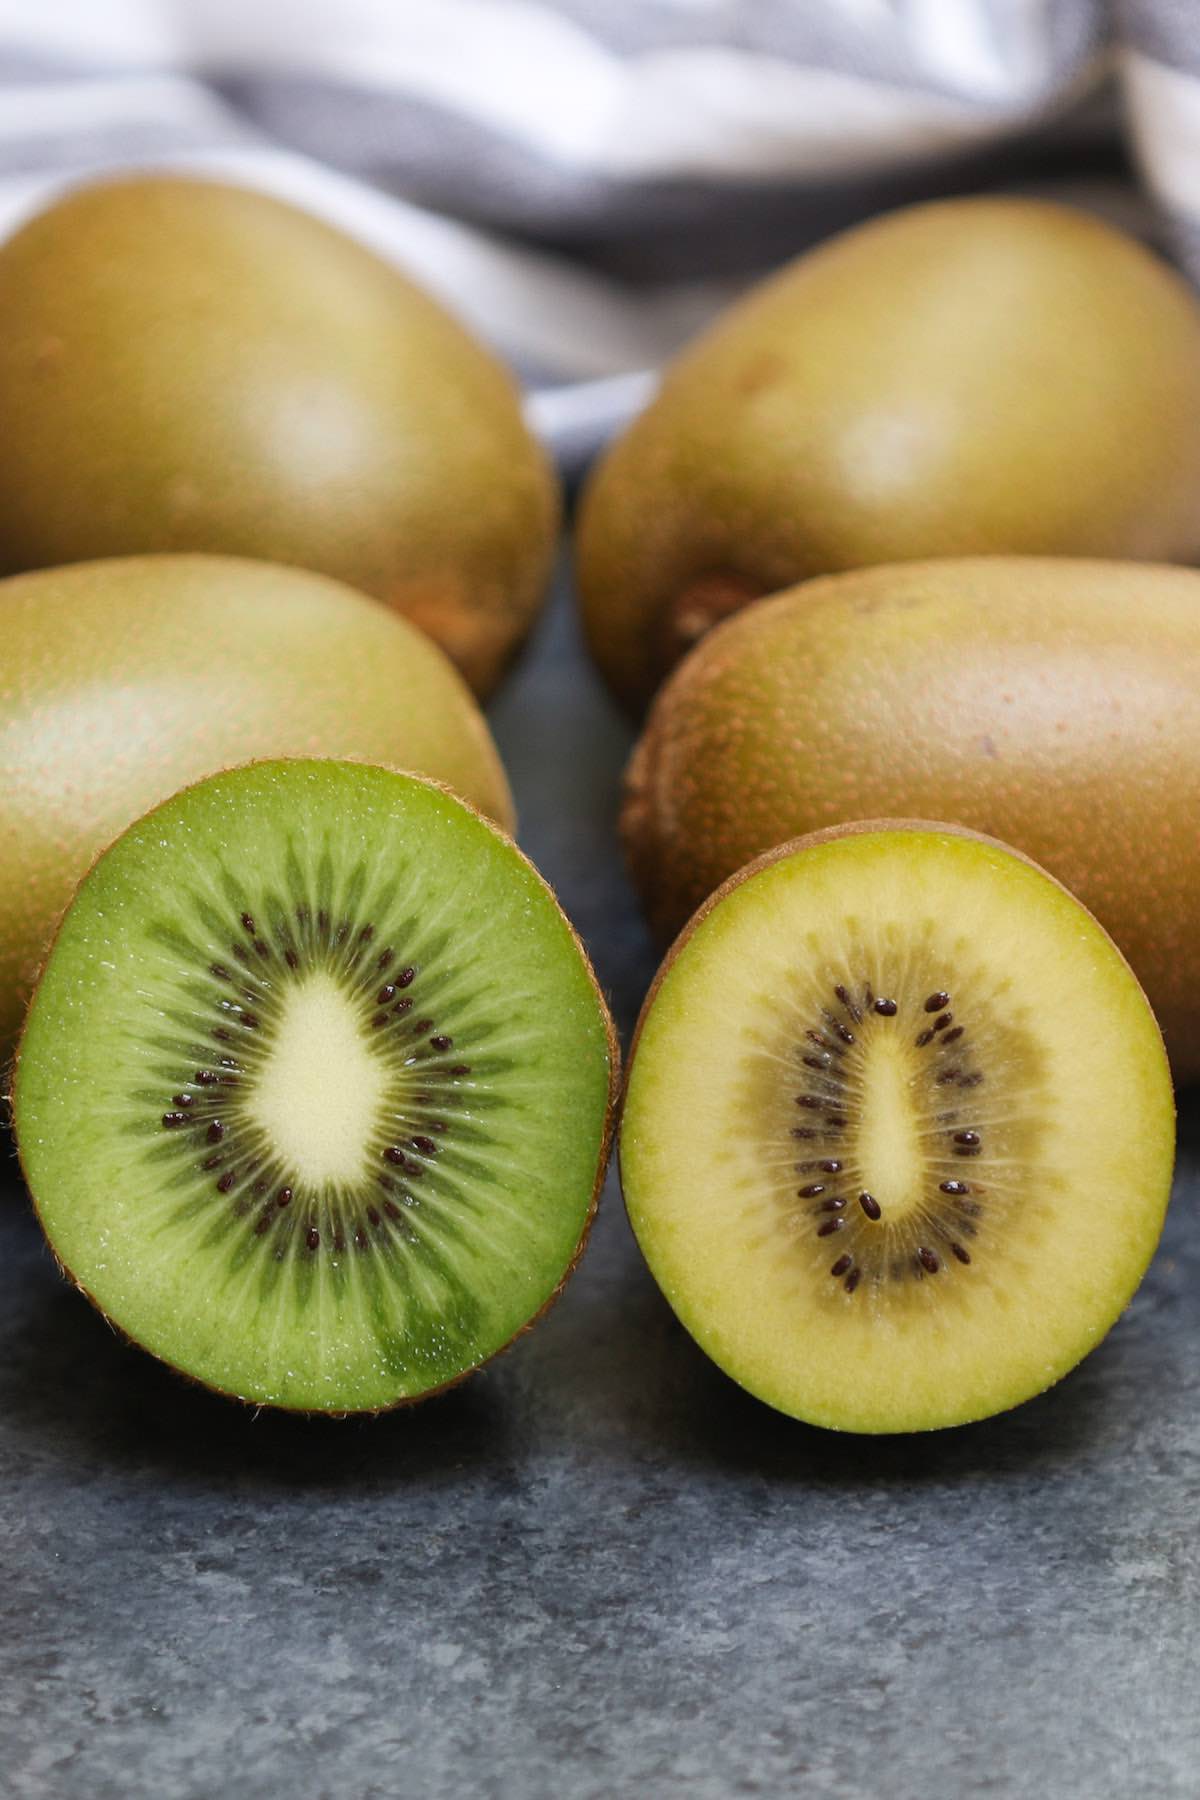 Side-by-side comparison of green kiwifruit and yellow kiwi showing the different colors of the flesh